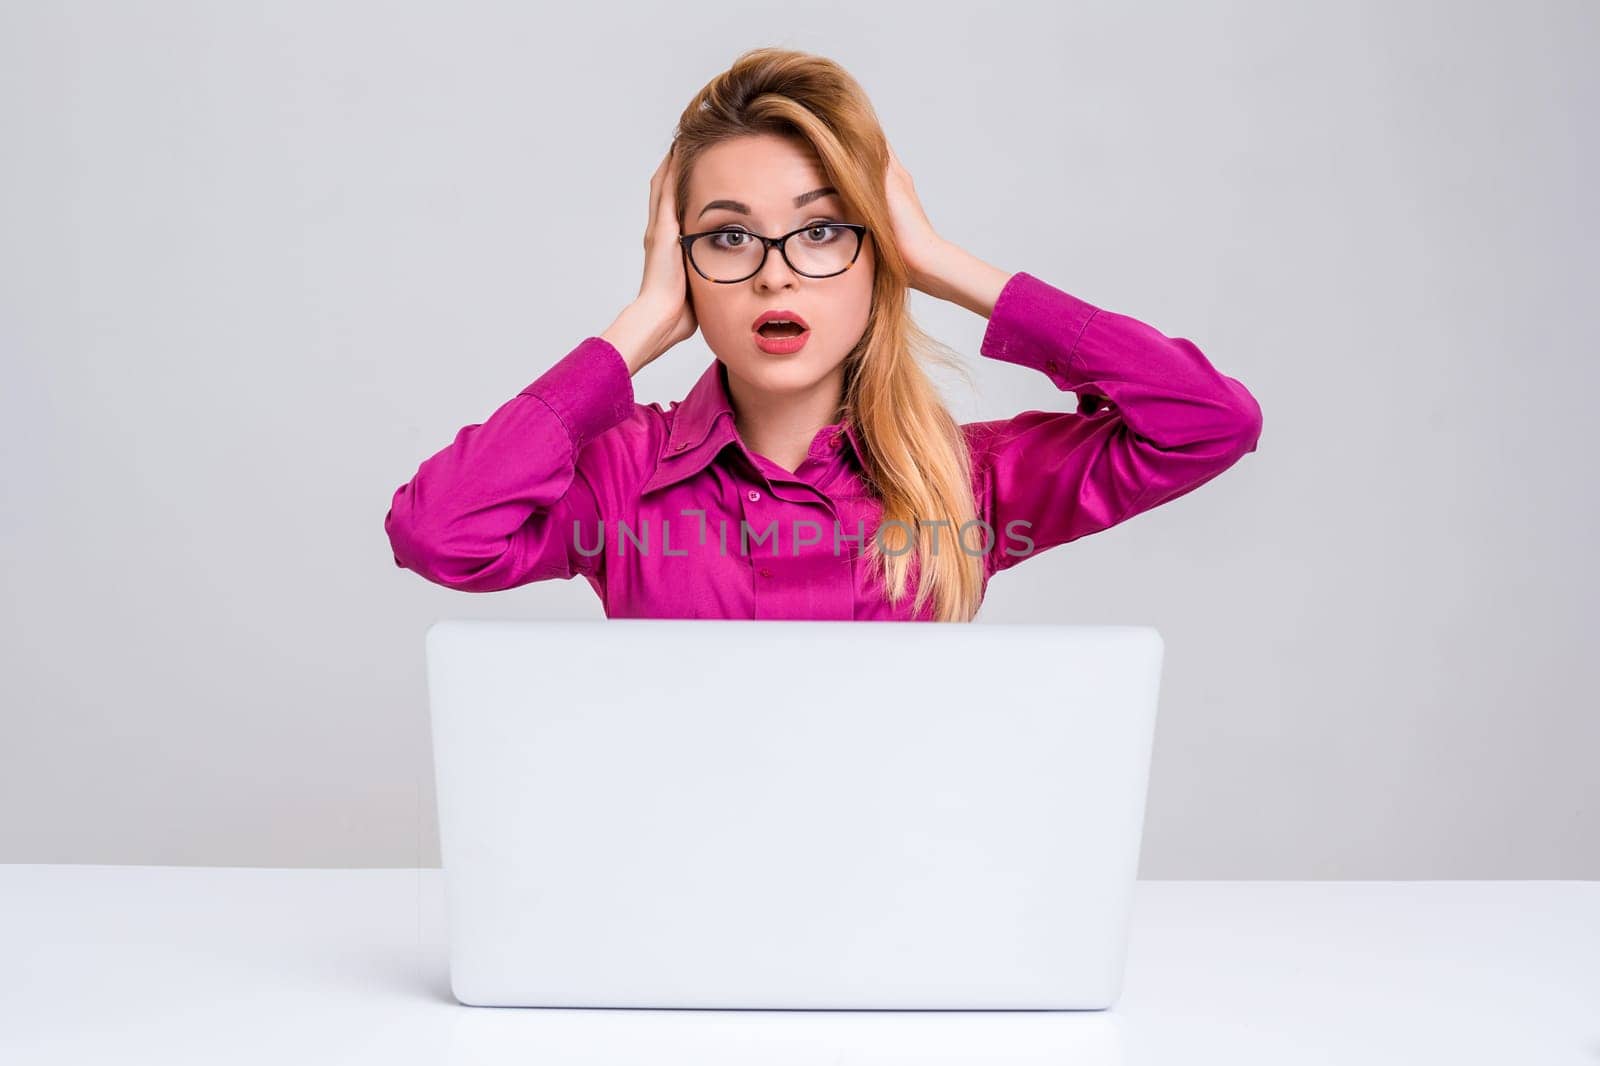 Young businesswoman working at laptop computer. she is going through and looking at the camera. her head in her hands